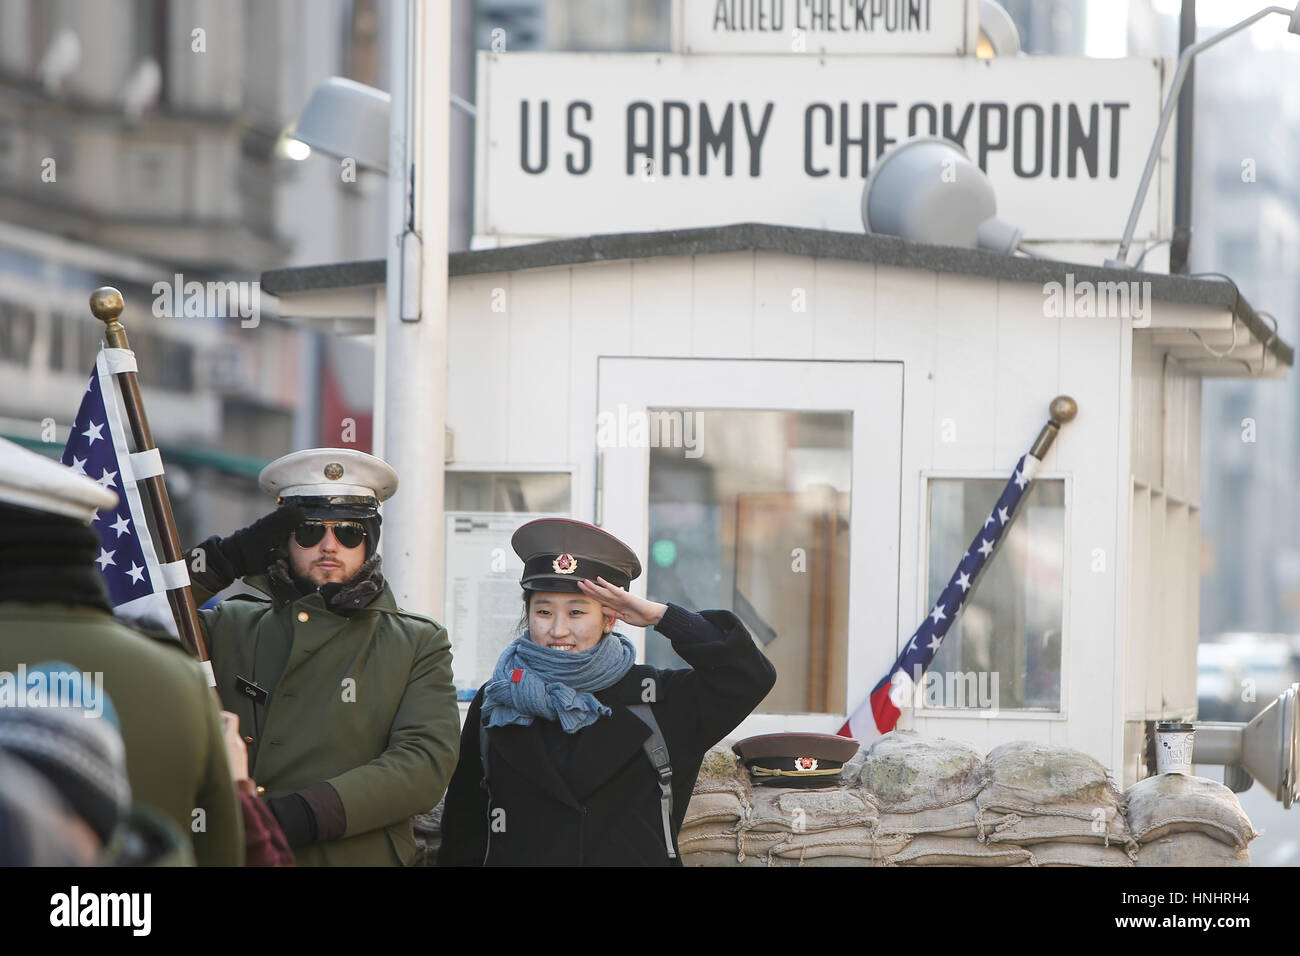 Berlin, Germany. 13th Feb, 2017. Tourists are seen having their picture taken on a cold morning on 13 February, 2017 at checkpoint Charlie where formerly the border between the Soviet occupied East and free Western part of the city existed. Credit: Willem Arriens/Alamy Live News Stock Photo